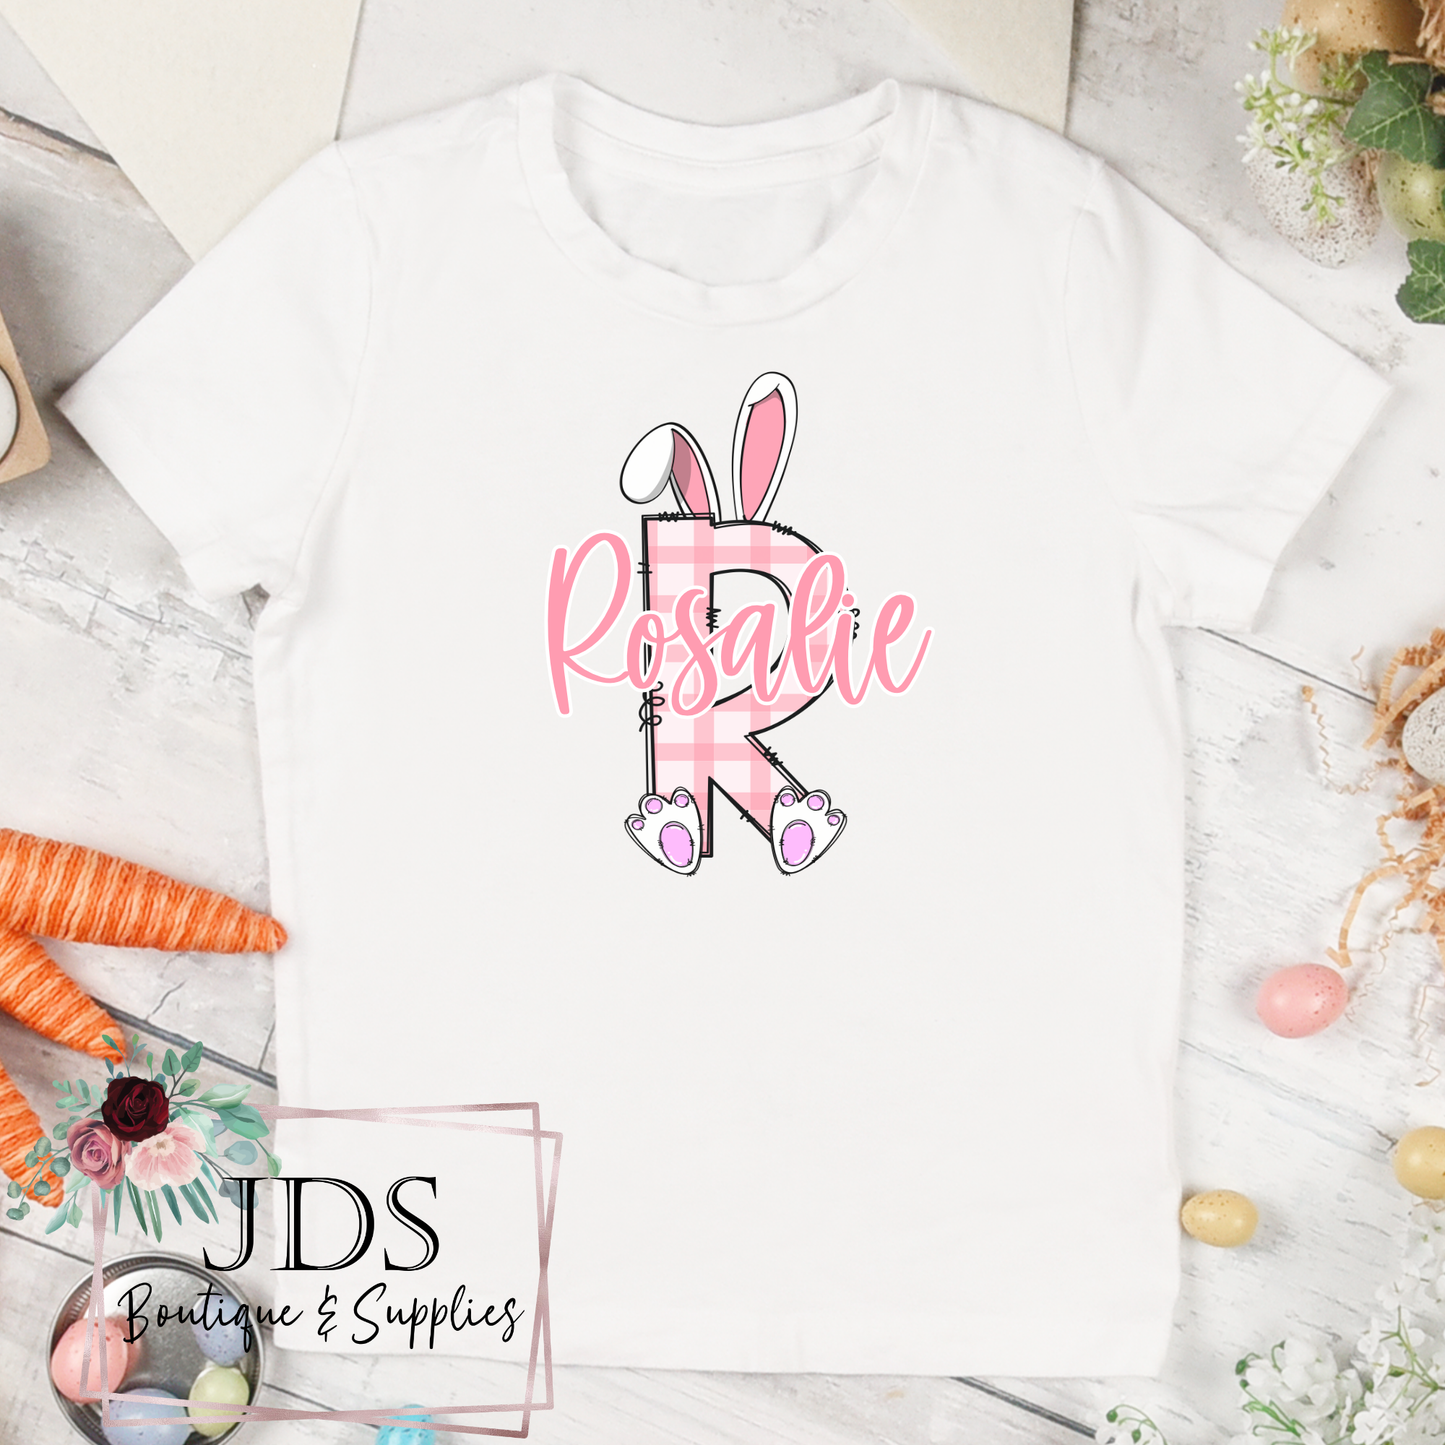 Kids Personalized Name Easter Shirt